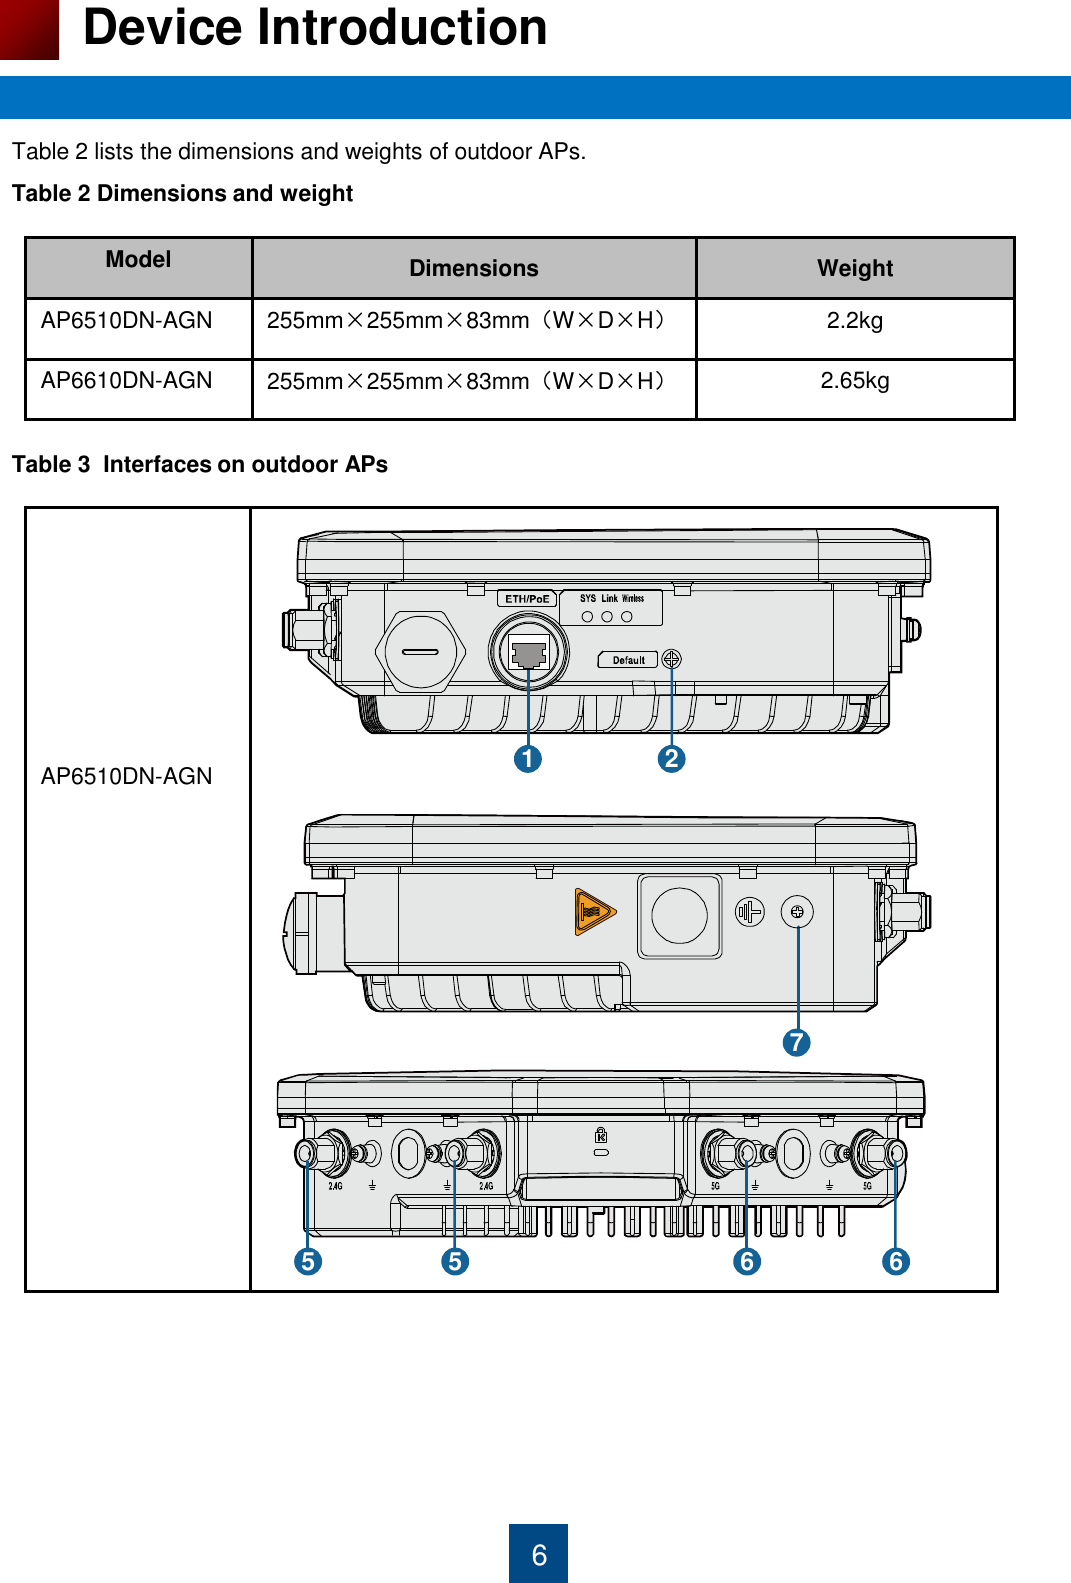 6 Device Introduction Table 2 lists the dimensions and weights of outdoor APs.  Table 2 Dimensions and weight   Model Dimensions Weight AP6510DN-AGN 255mm×255mm×83mm（W×D×H） 2.2kg AP6610DN-AGN 255mm×255mm×83mm（W×D×H） 2.65kg Table 3  Interfaces on outdoor APs            AP6510DN-AGN    5  5  6  6 1  2 7 